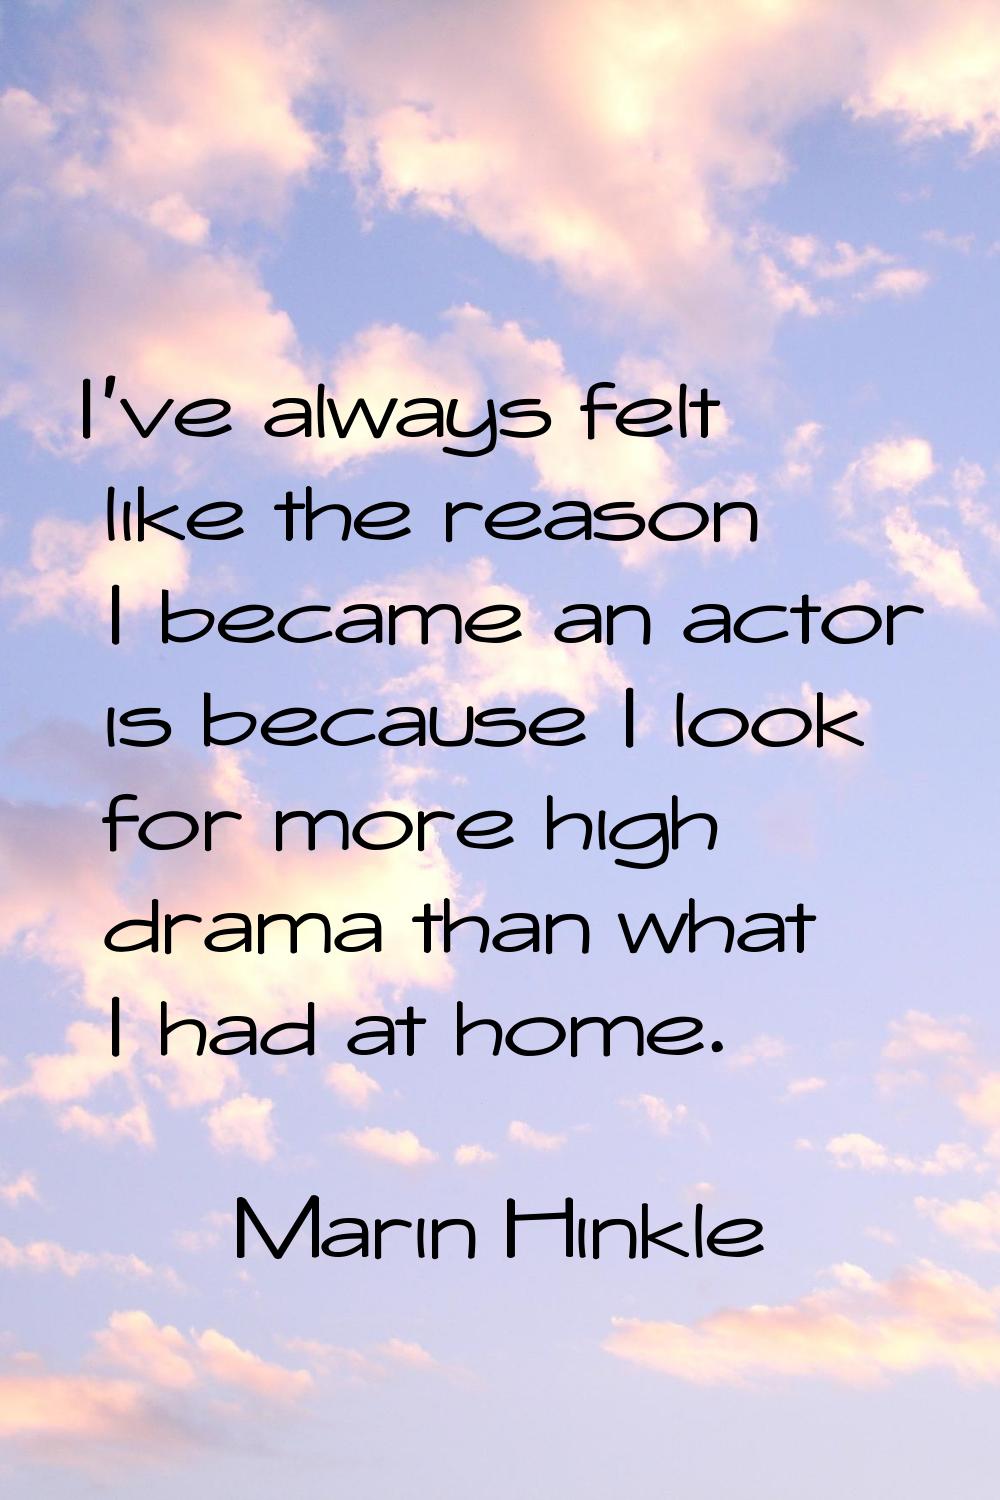 I've always felt like the reason I became an actor is because I look for more high drama than what 